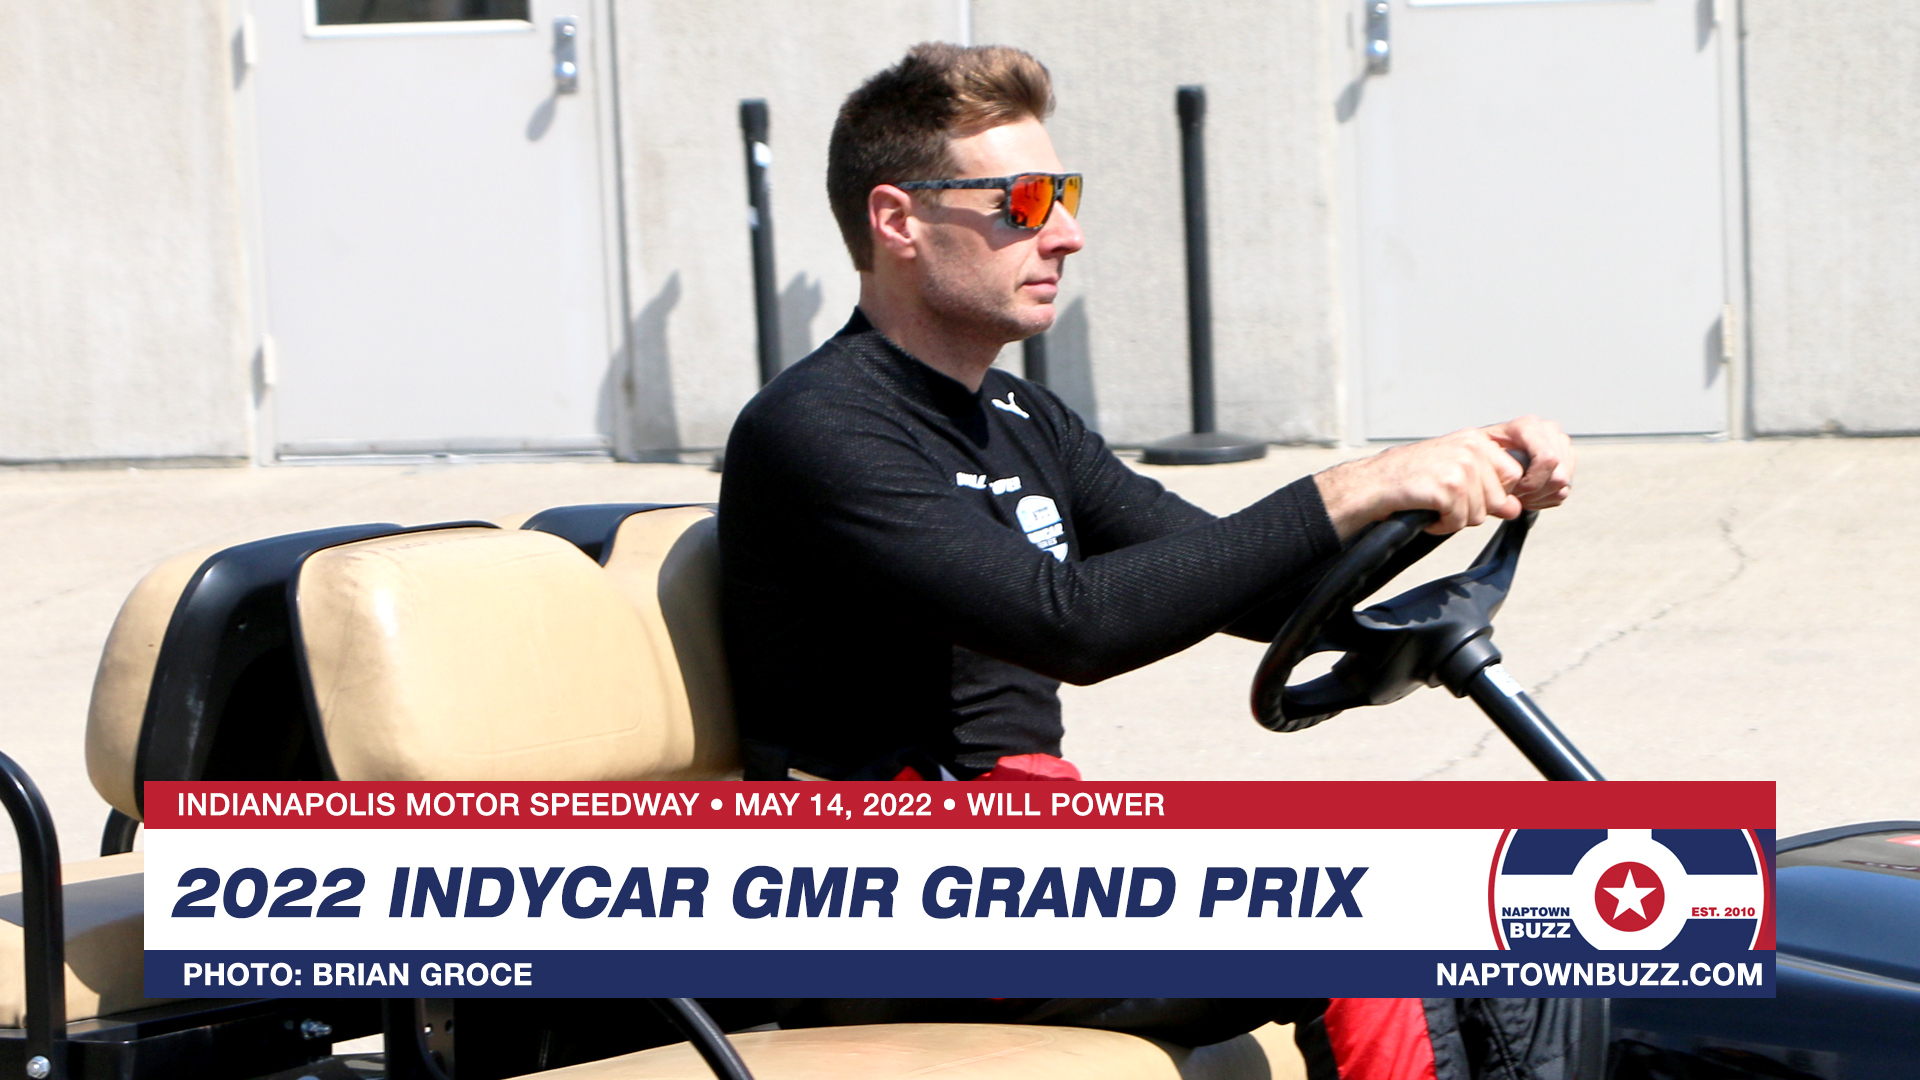 Will Power on Indy Car Grand Prix Race Day, May 14, 2022